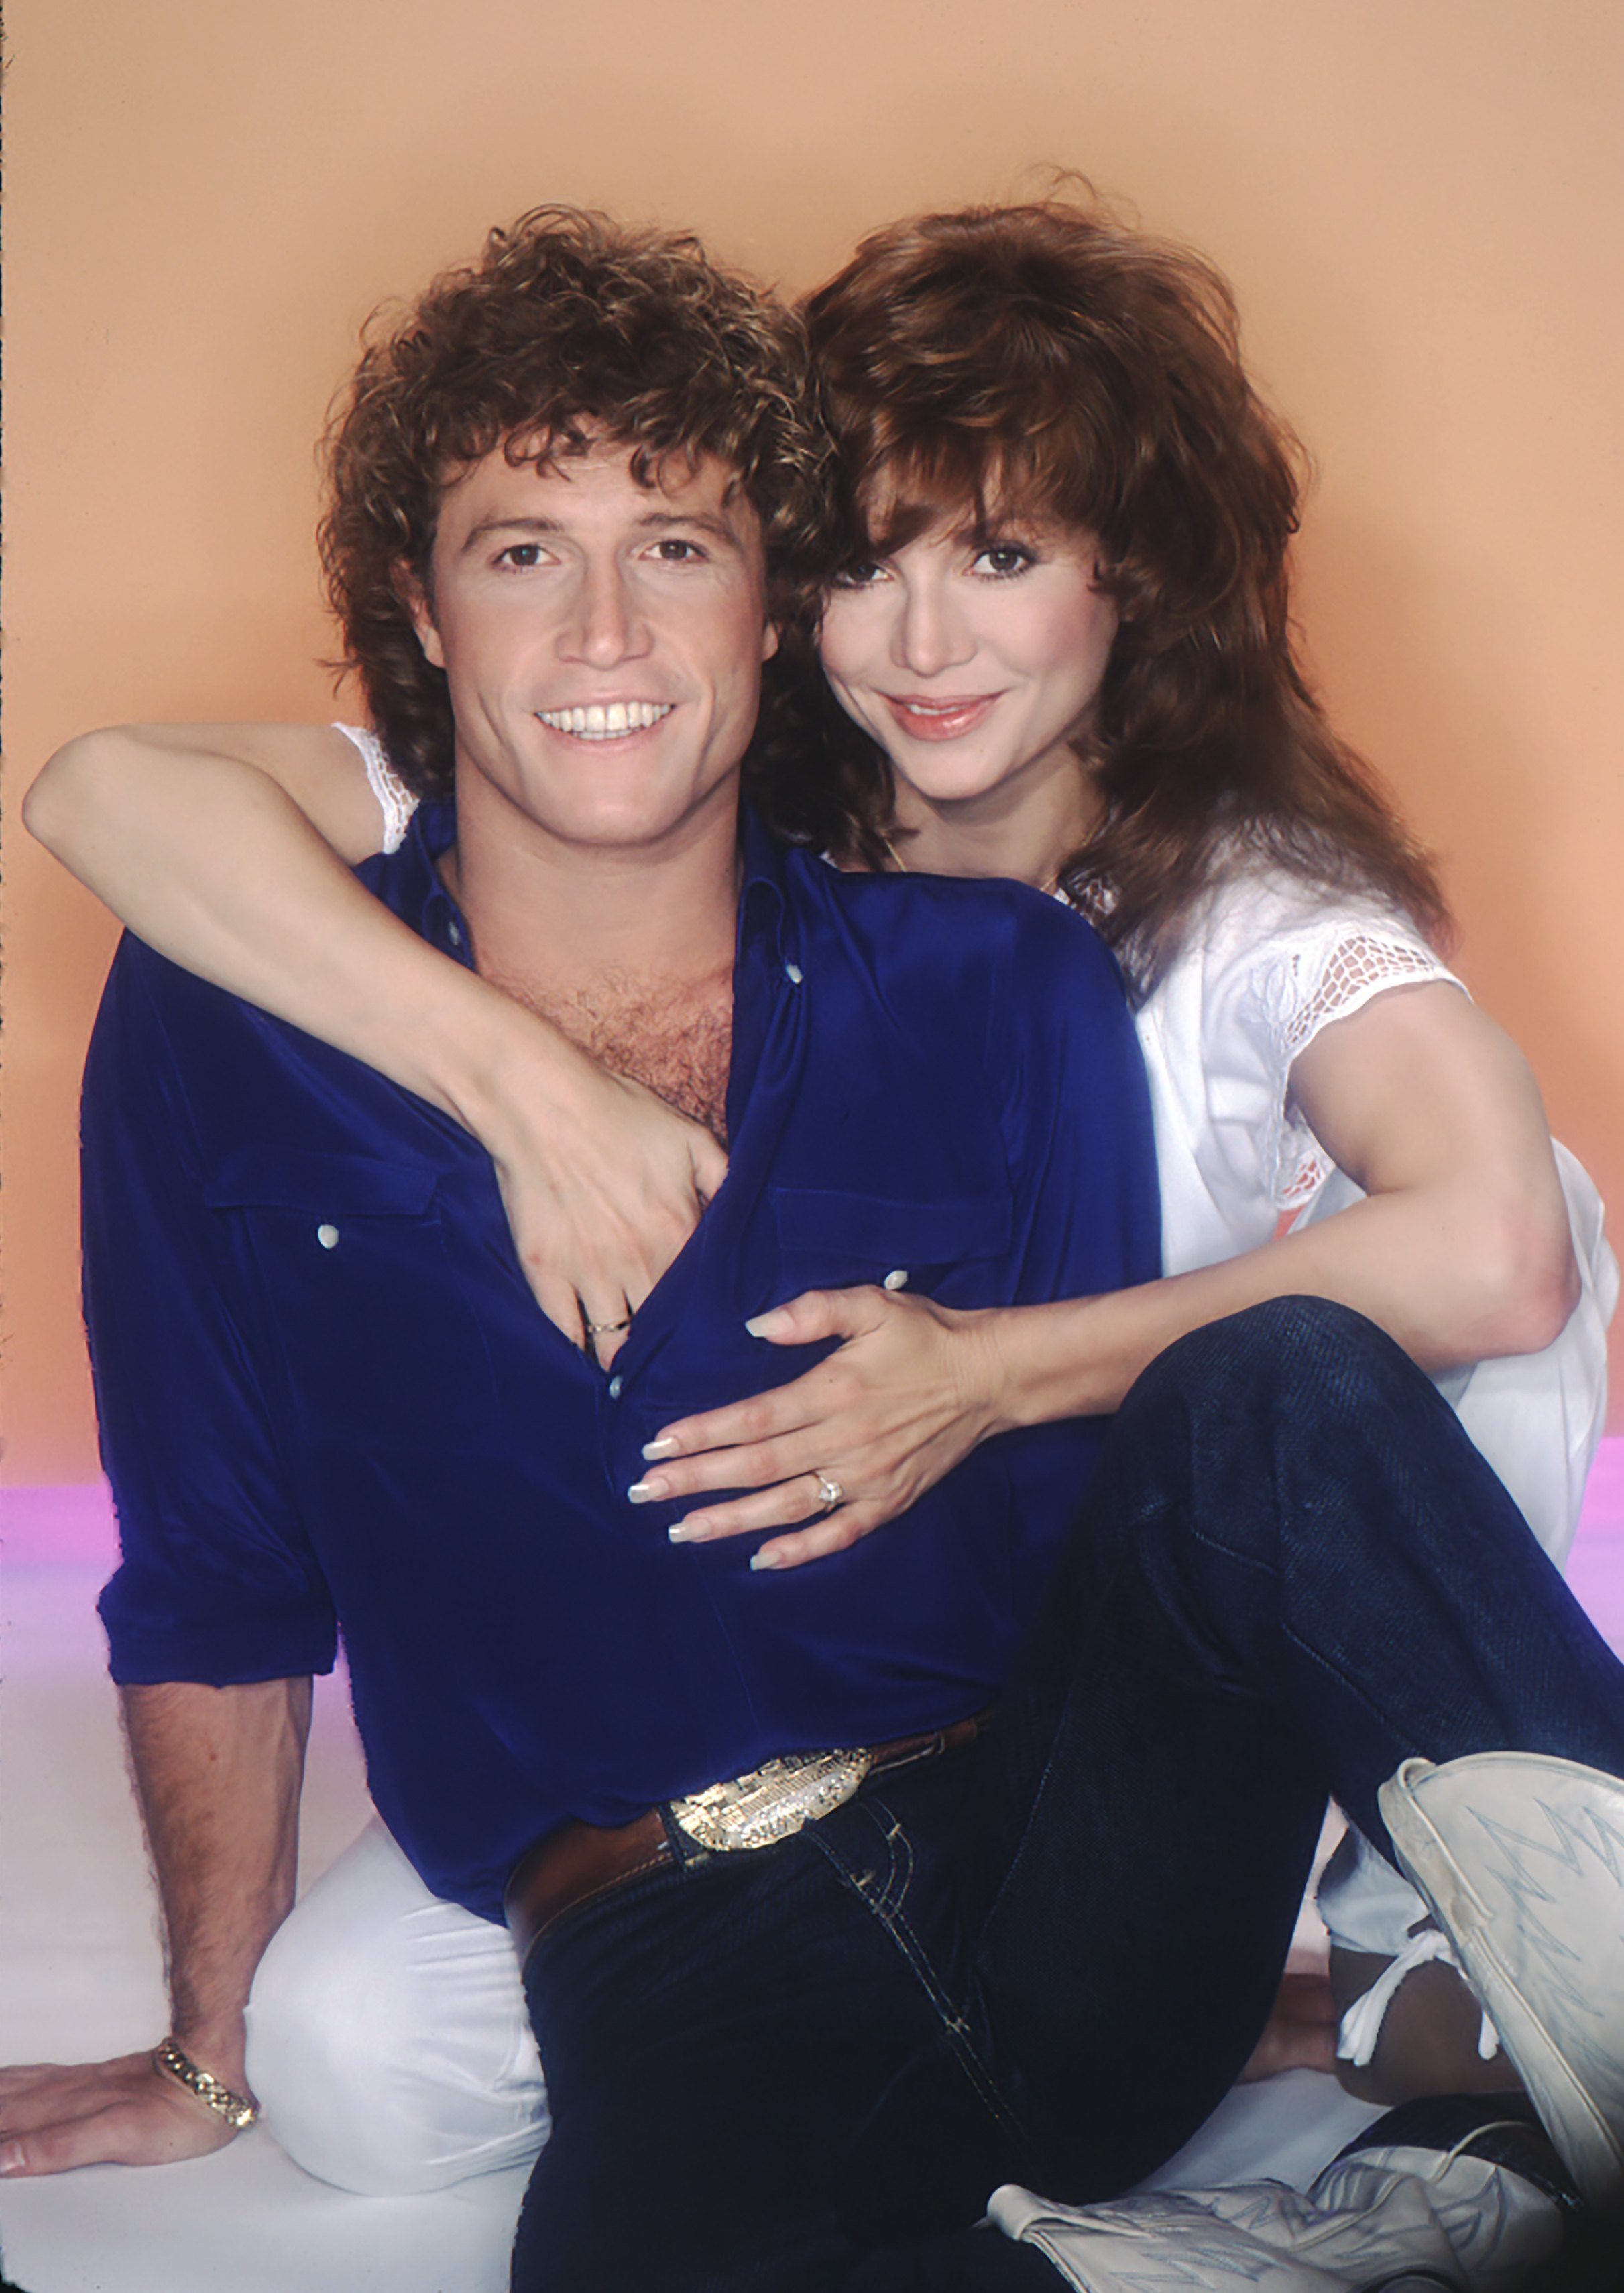 Singer Andy Gibb and girlfriend actress Victoria Principal pose for a portrait in 1981 in Los Angeles, California | Source: Getty Images